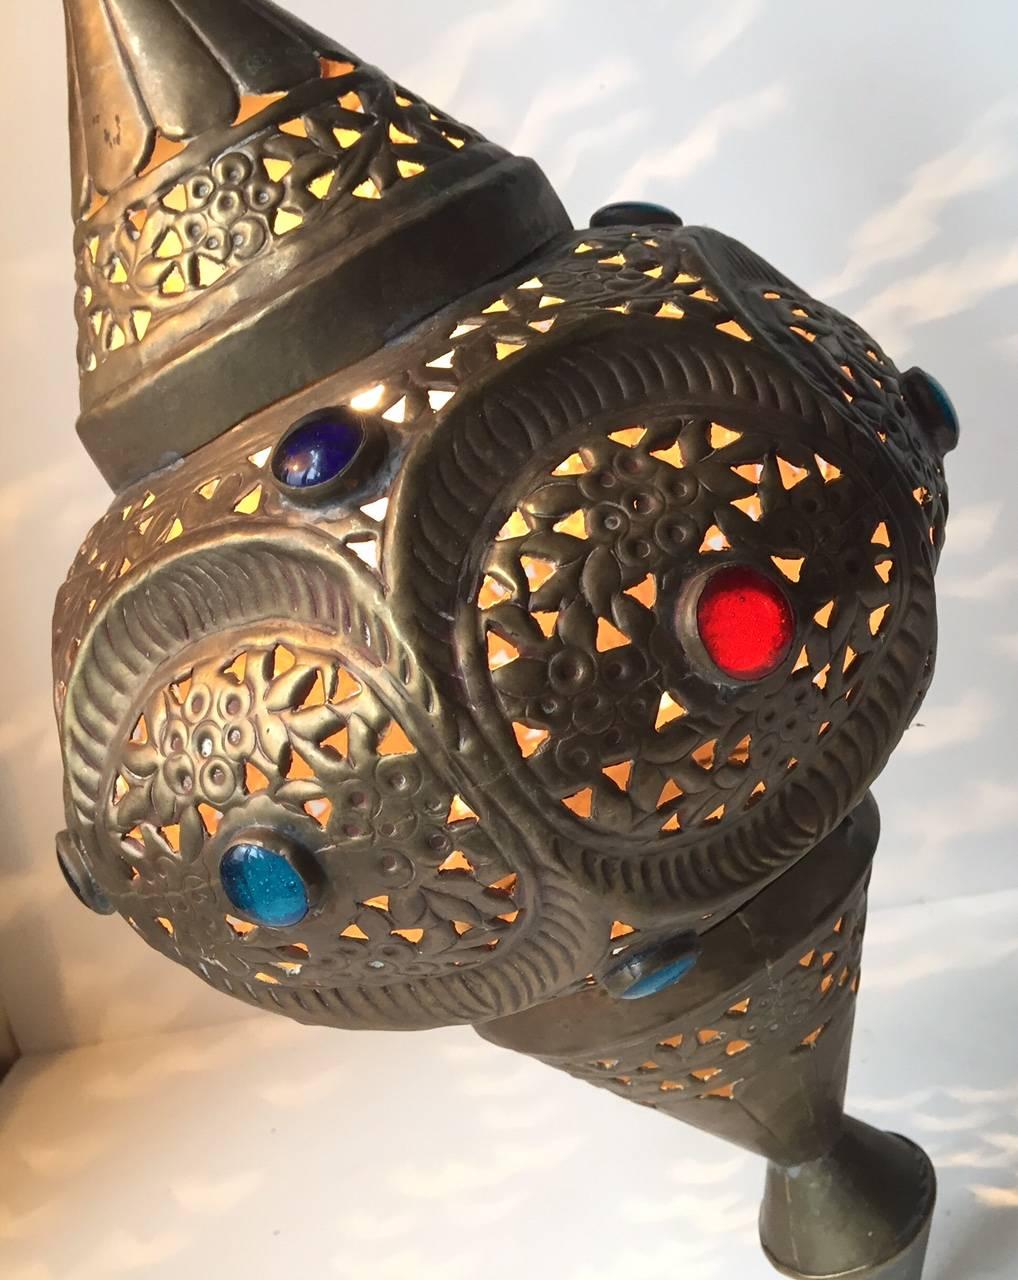 Beautifully handcrafted Moroccan hanging lamp finely chiselled and bejeweled by Moroccan artisans in Marrakech. When lid this light creates small fire-flies that inhabit the surrounding surfaces.